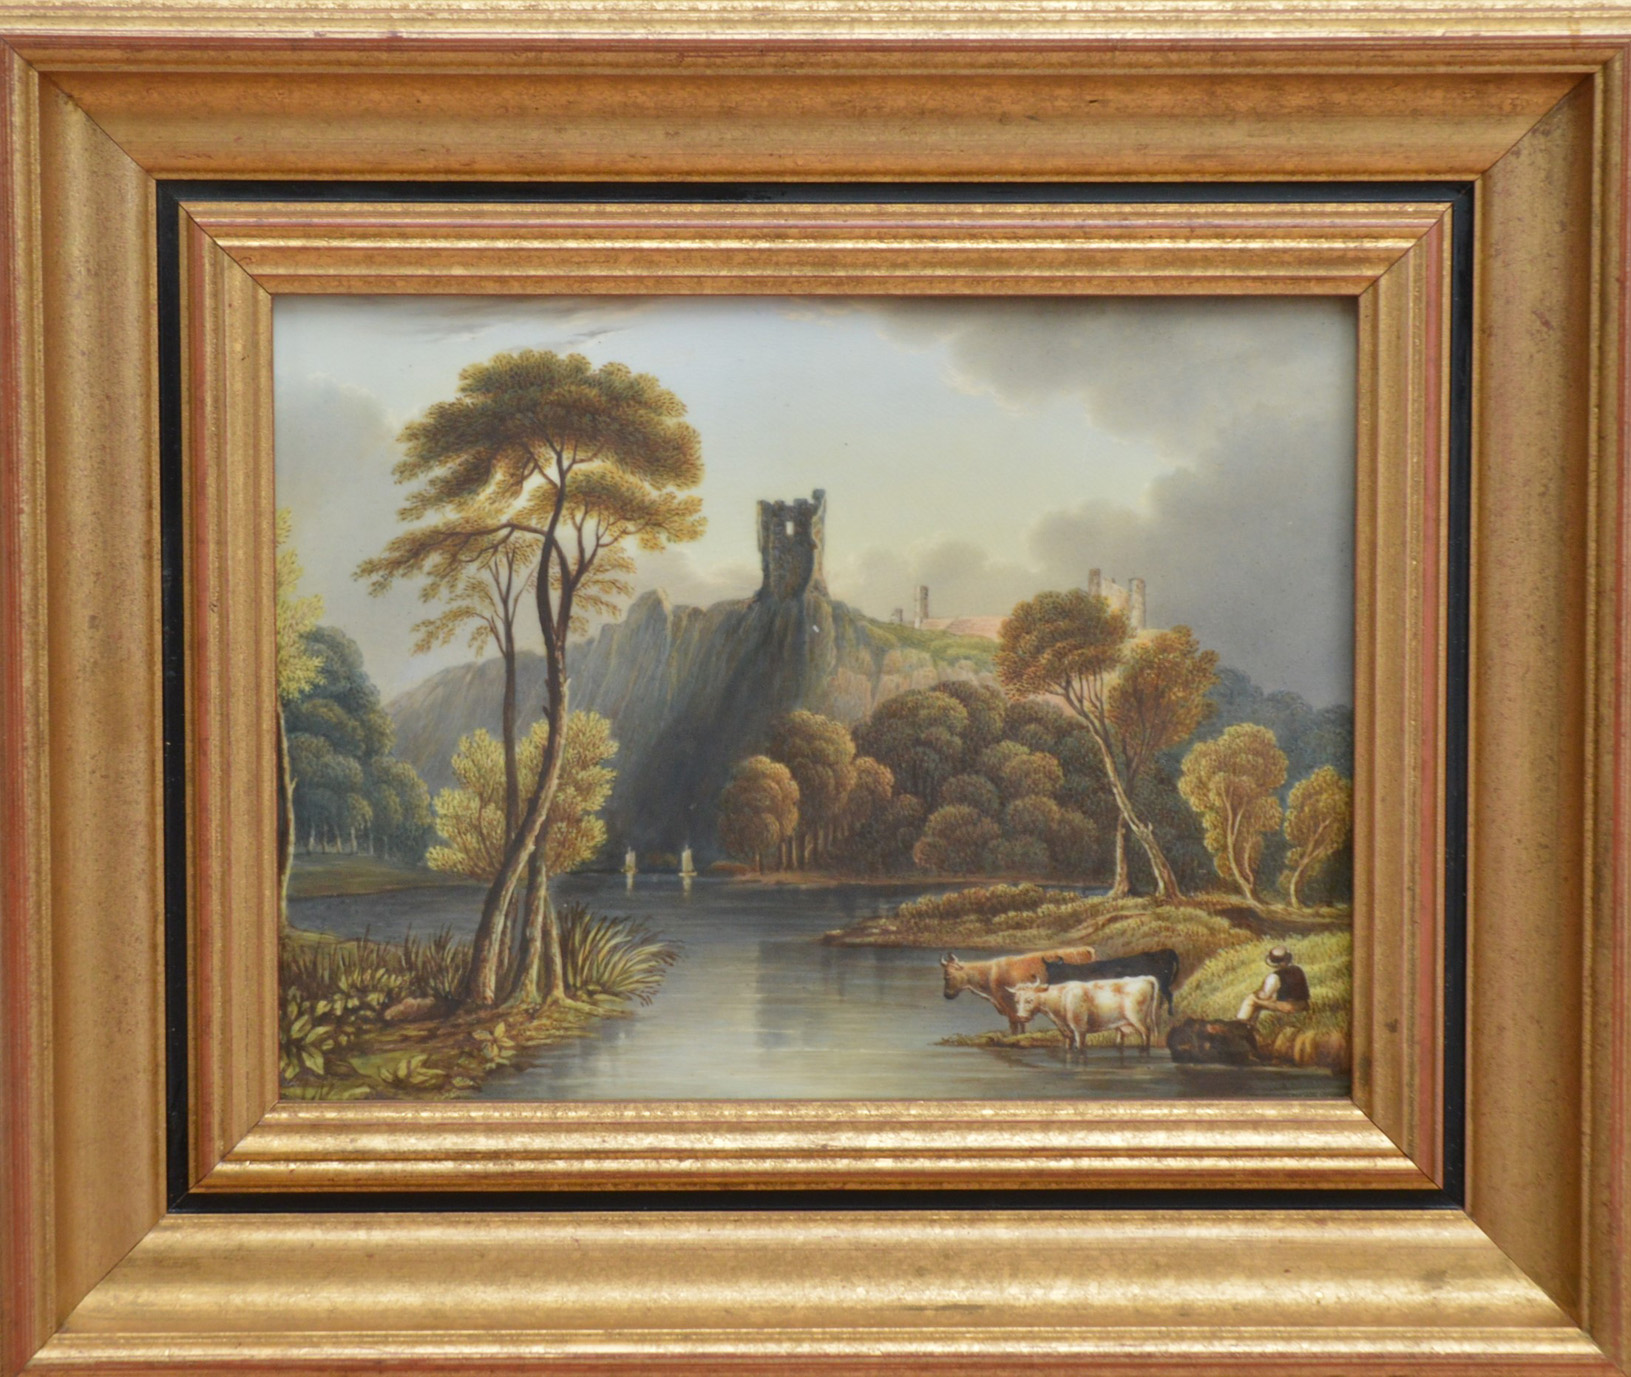 A 19th century English porcelain painted plaque, attributed to Daniel Lucas, depicting hill top